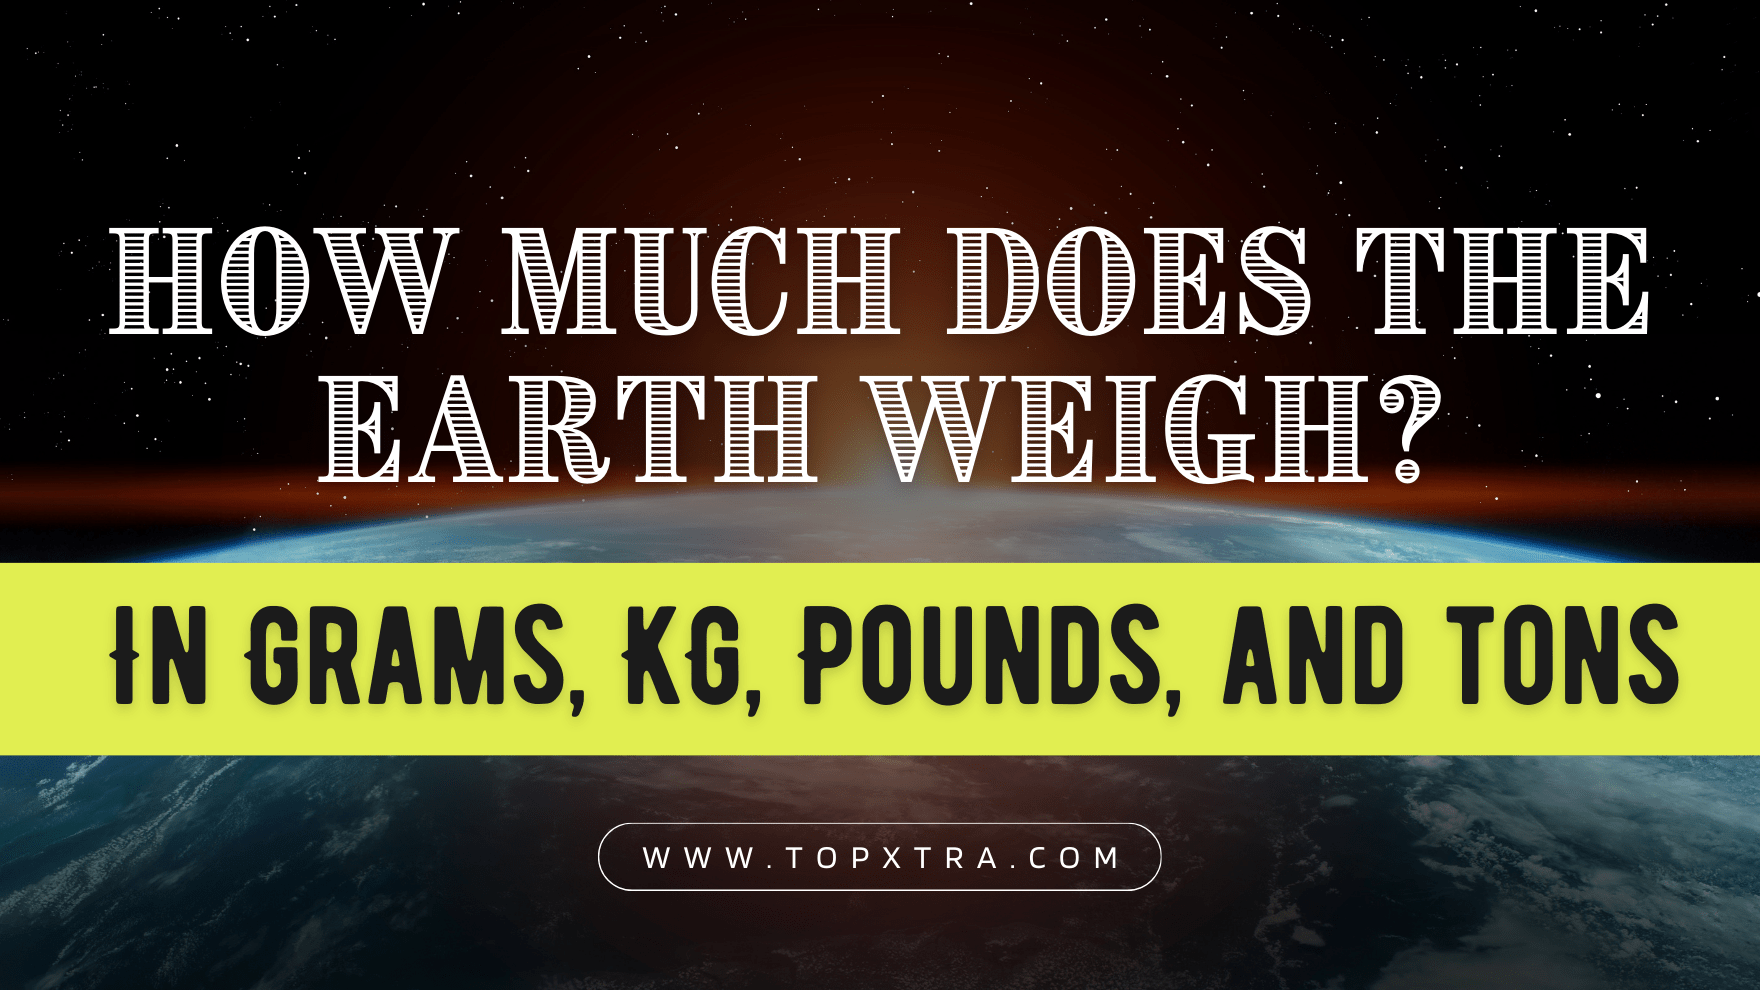 How Much Does the Earth Weigh? In Grams, KG, Pounds, and Tons